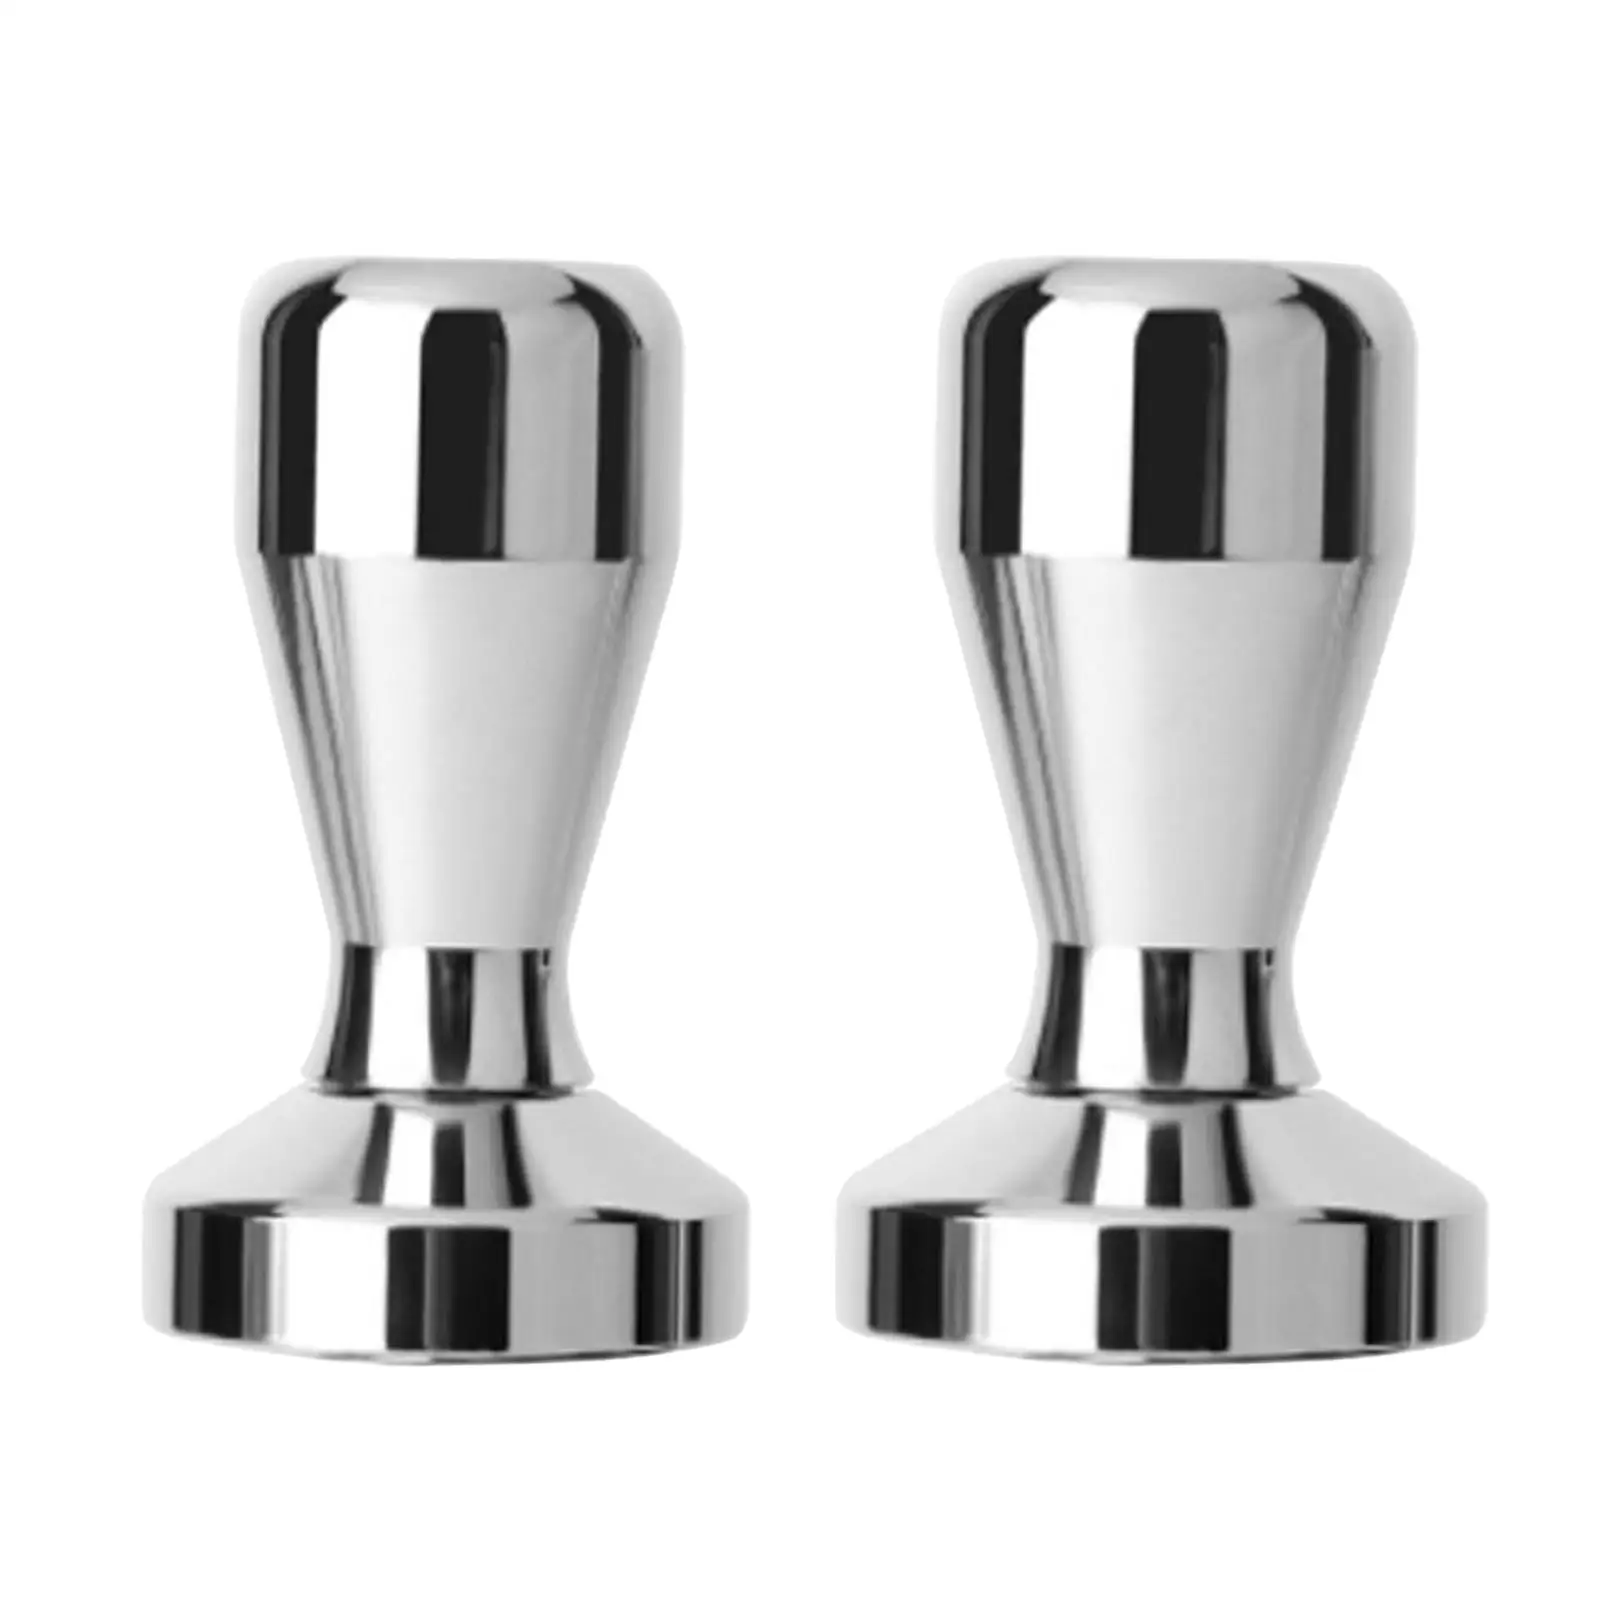 Stainless Steel Coffee Distributor Tamper Coffee Machine Parts Espresso Tamper for Home